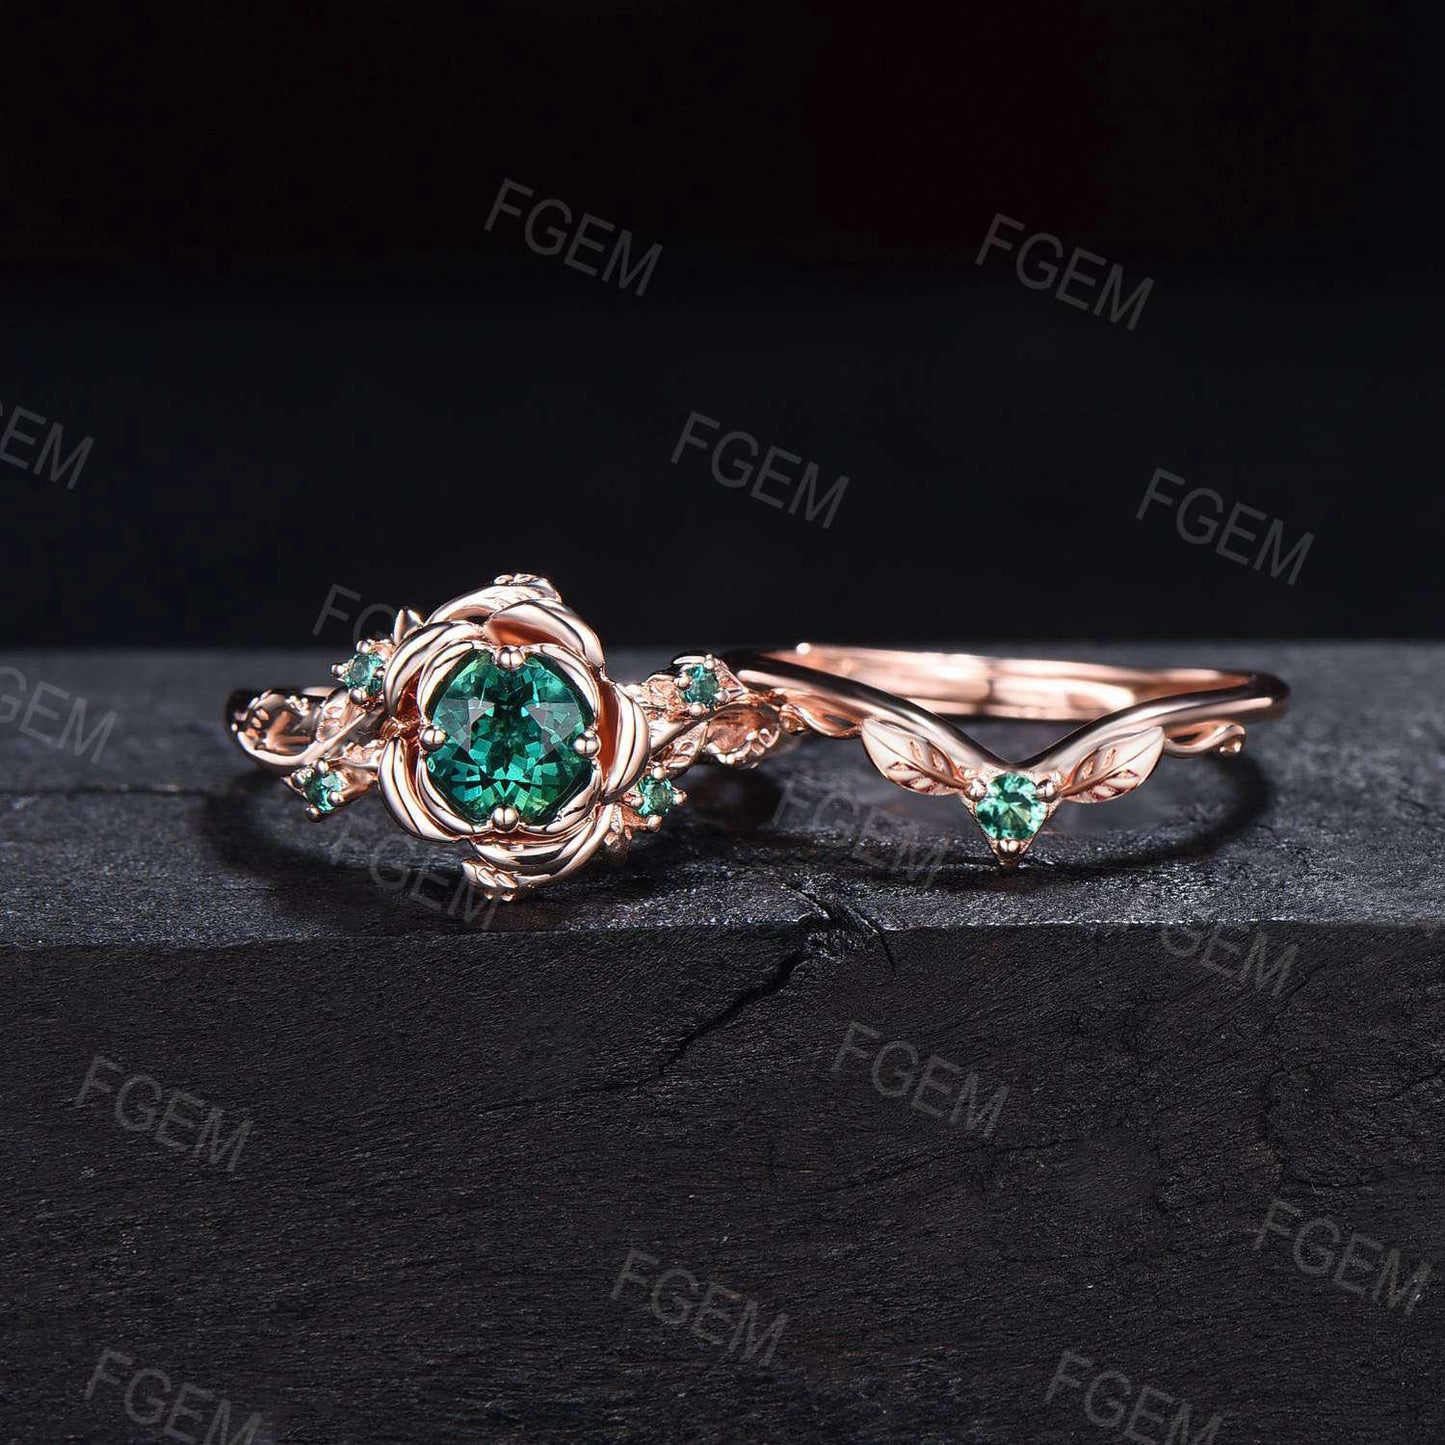 Green Emerald Floral Wedding Ring Set 5mm Round Cut Nature Inspired Branch Rose Flower Emerald Engagement Ring Set May Birthstone Bridal Set